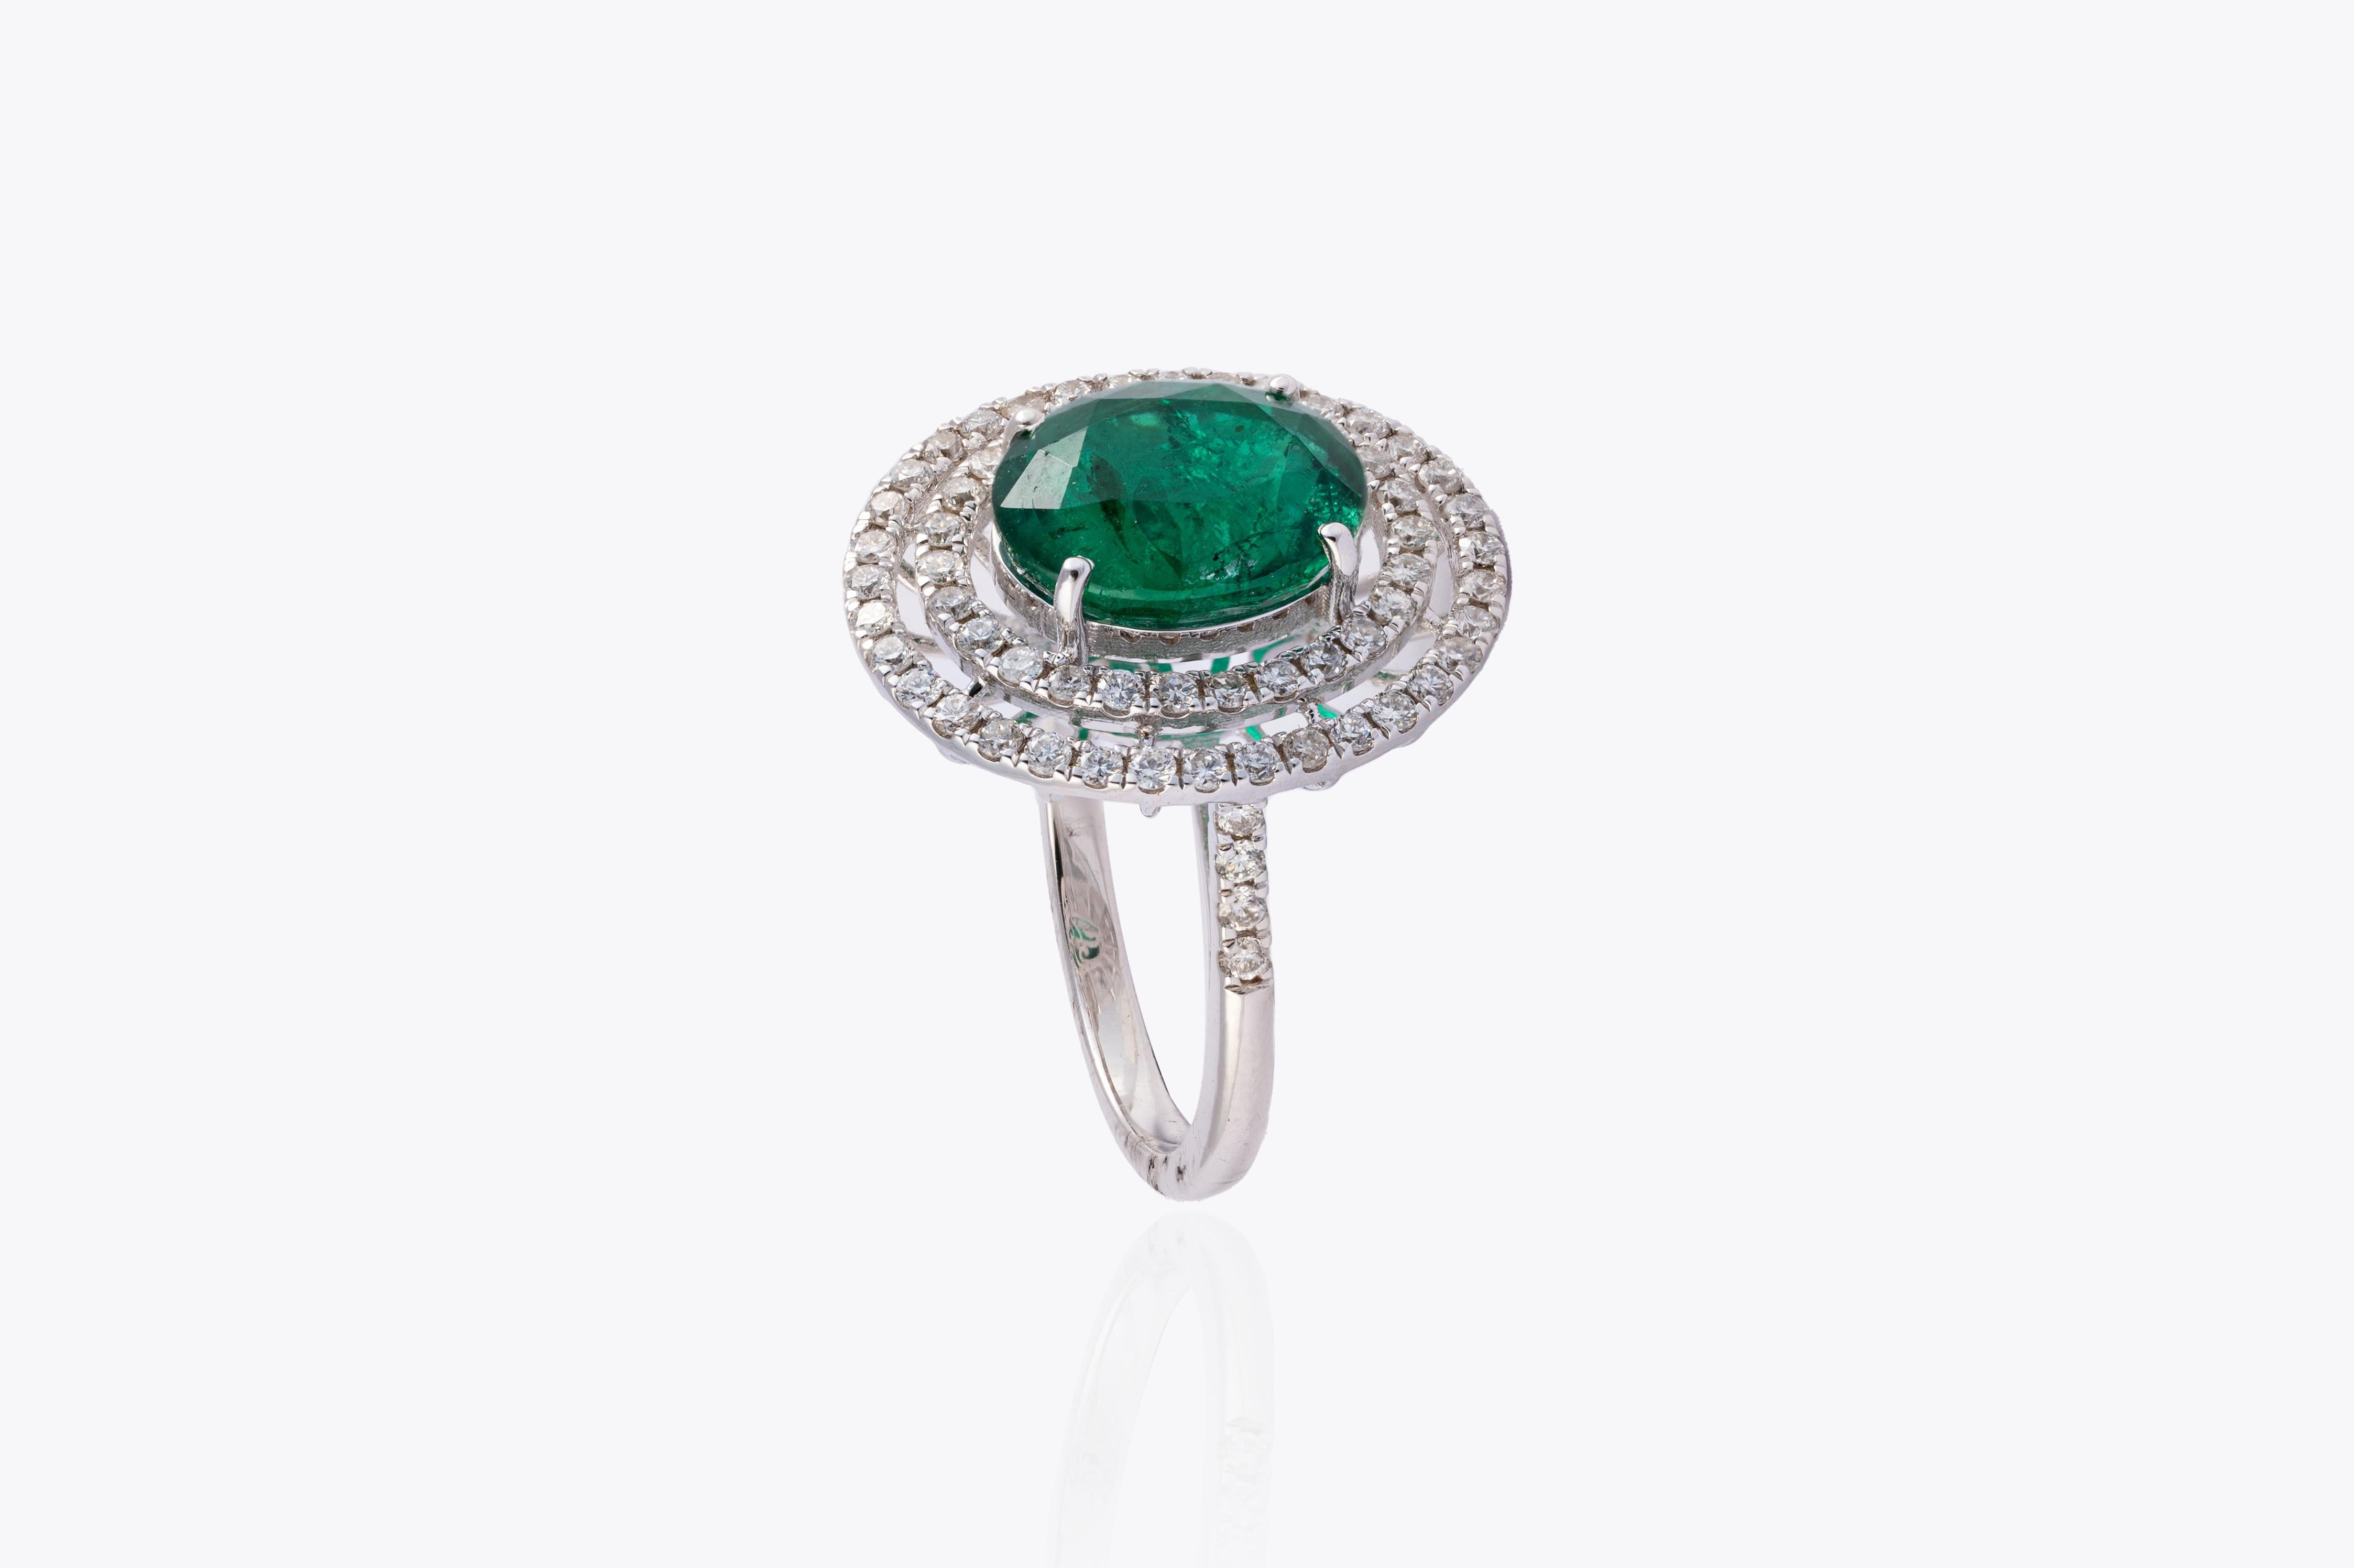 this is stunning natural Zambian ring with very high quality and also very good ciarity
diamonds which are vsi clarity and G colour
emeralds : 3.80cts
diamonds :0.75cts
gold : 3.90gms
very hard to capture the true color and luster of the stone, I